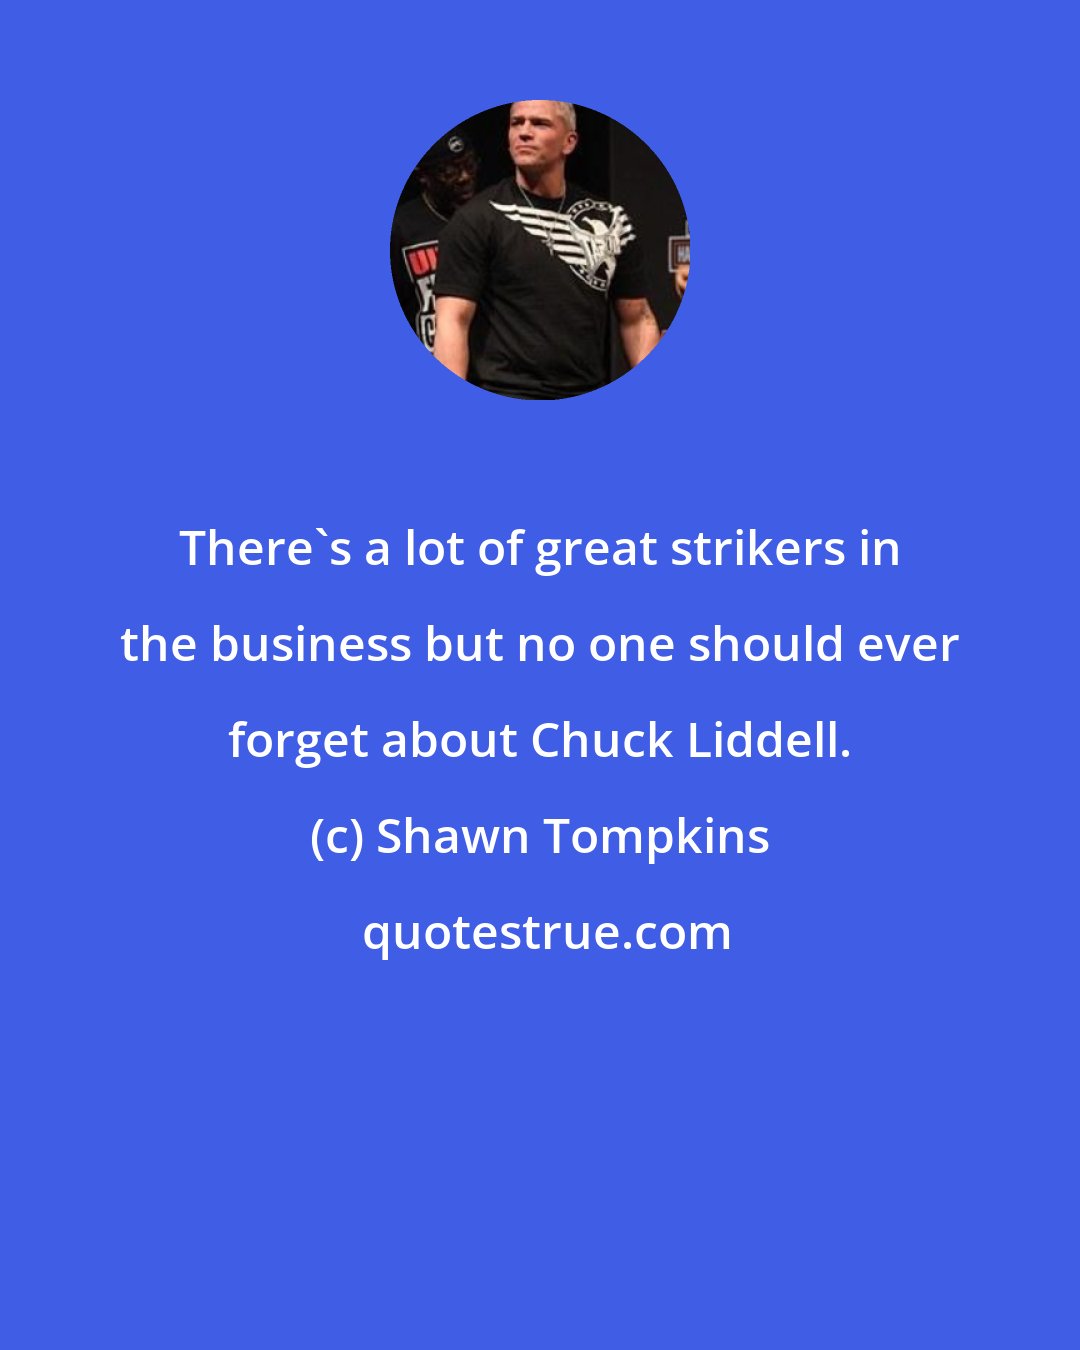 Shawn Tompkins: There's a lot of great strikers in the business but no one should ever forget about Chuck Liddell.